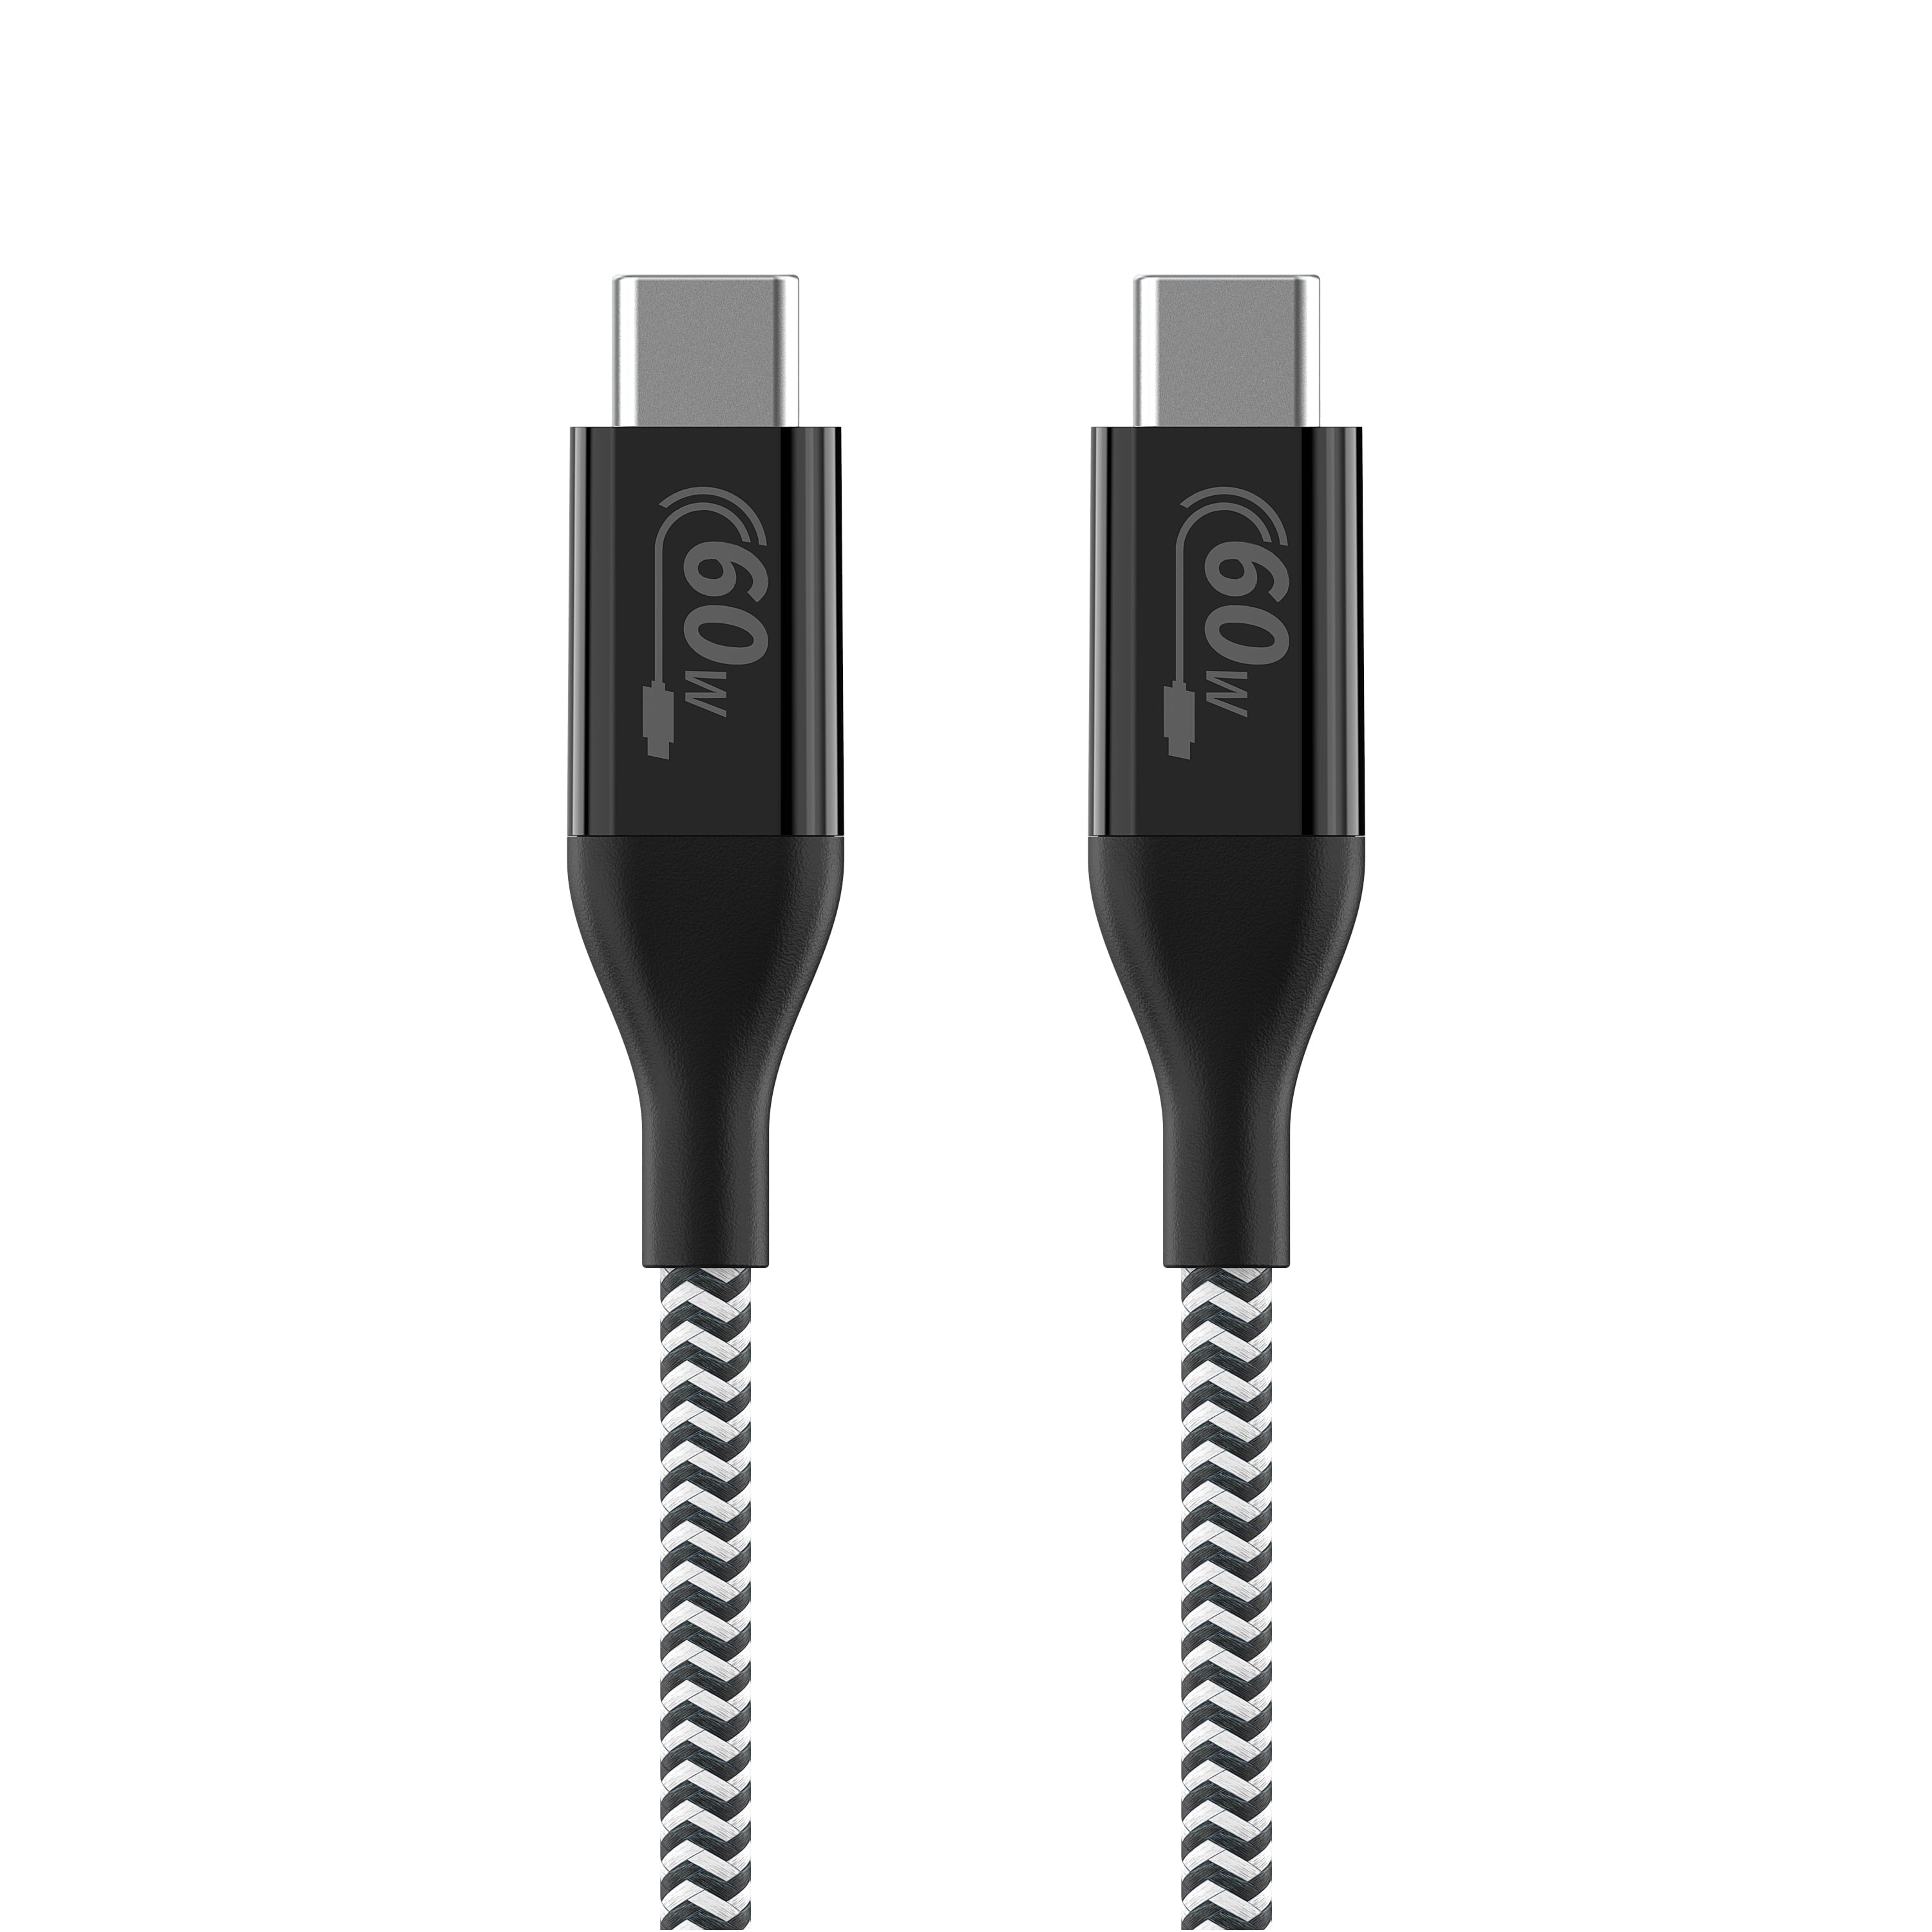 Auto Drive USB Type-C to C Data Sync and Charging Cable, 6 feet, Black, Compatible Android Devices